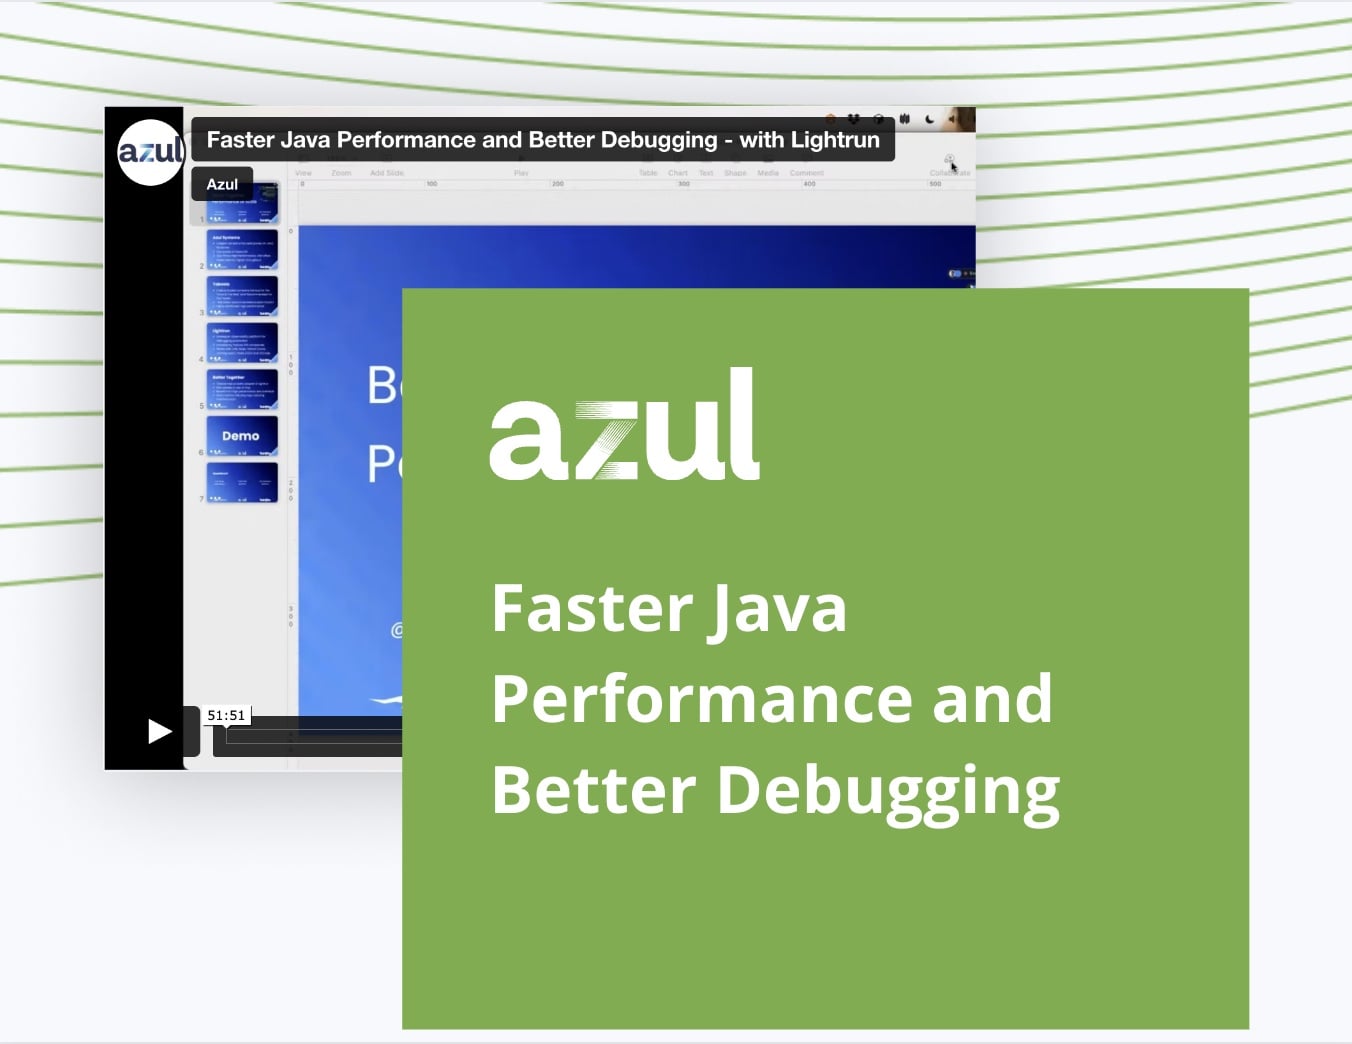 Faster Java Performance and Better Debugging